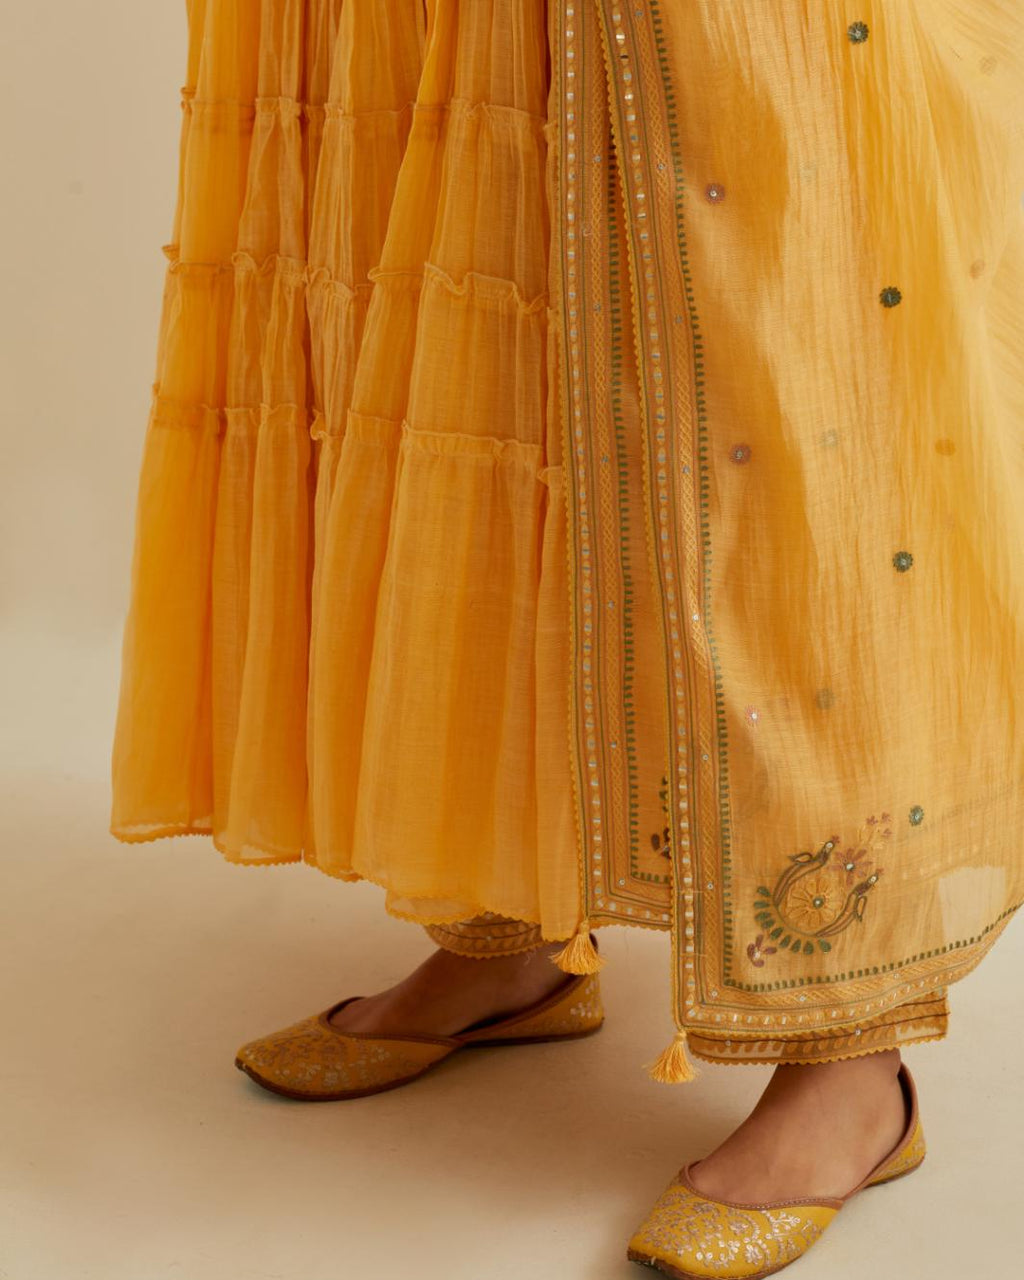 Yellow cotton chanderi multi-tiered kurta dress set with 3/4 sleeves, highlighted with mirror work.